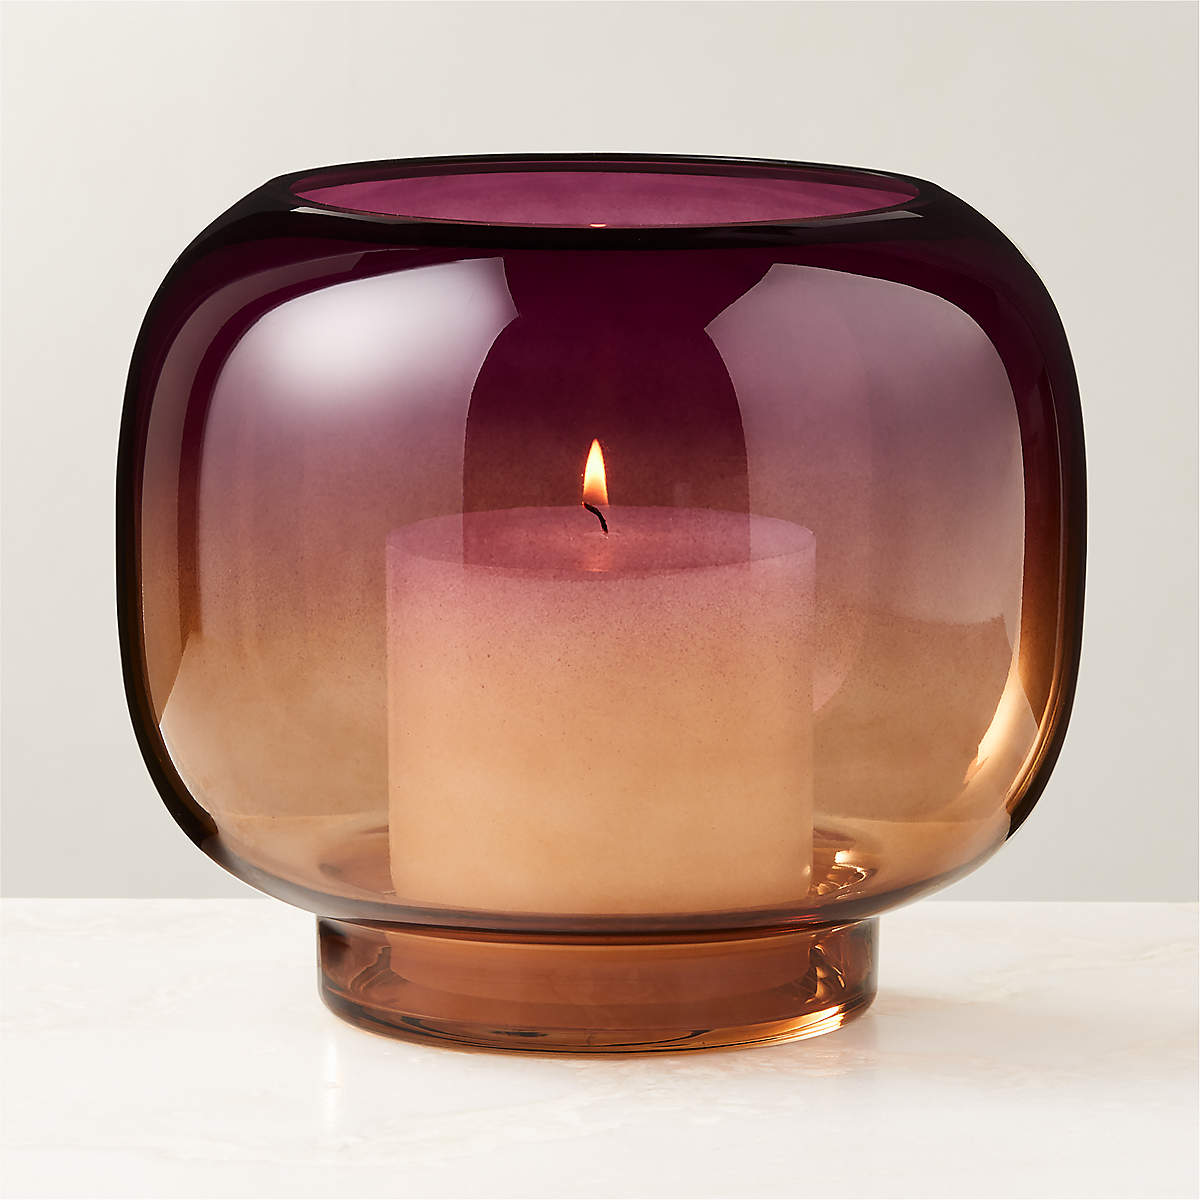 Two Toned Handblown Candle Holder